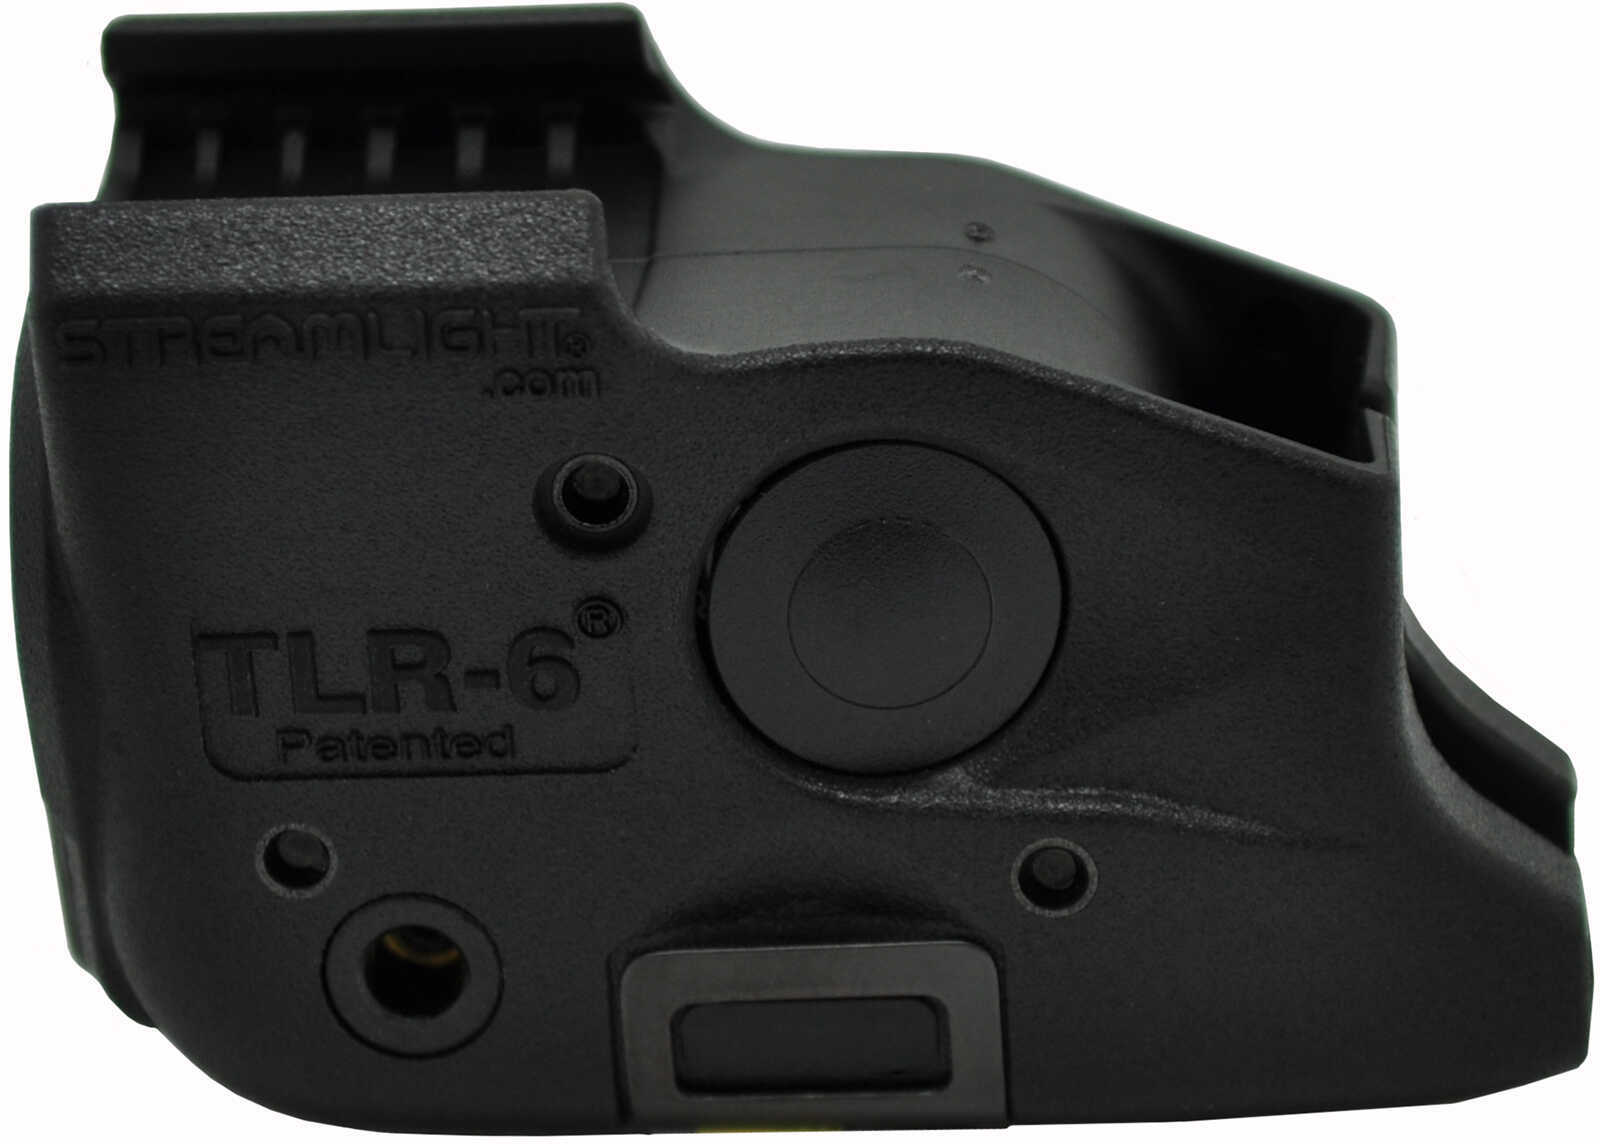 Streamlight TLR-6 Fits Glock 17/22 and 19/23 Black White LED and Red Laser Includes 2 CR 1/3N Lithium Batteries 69290